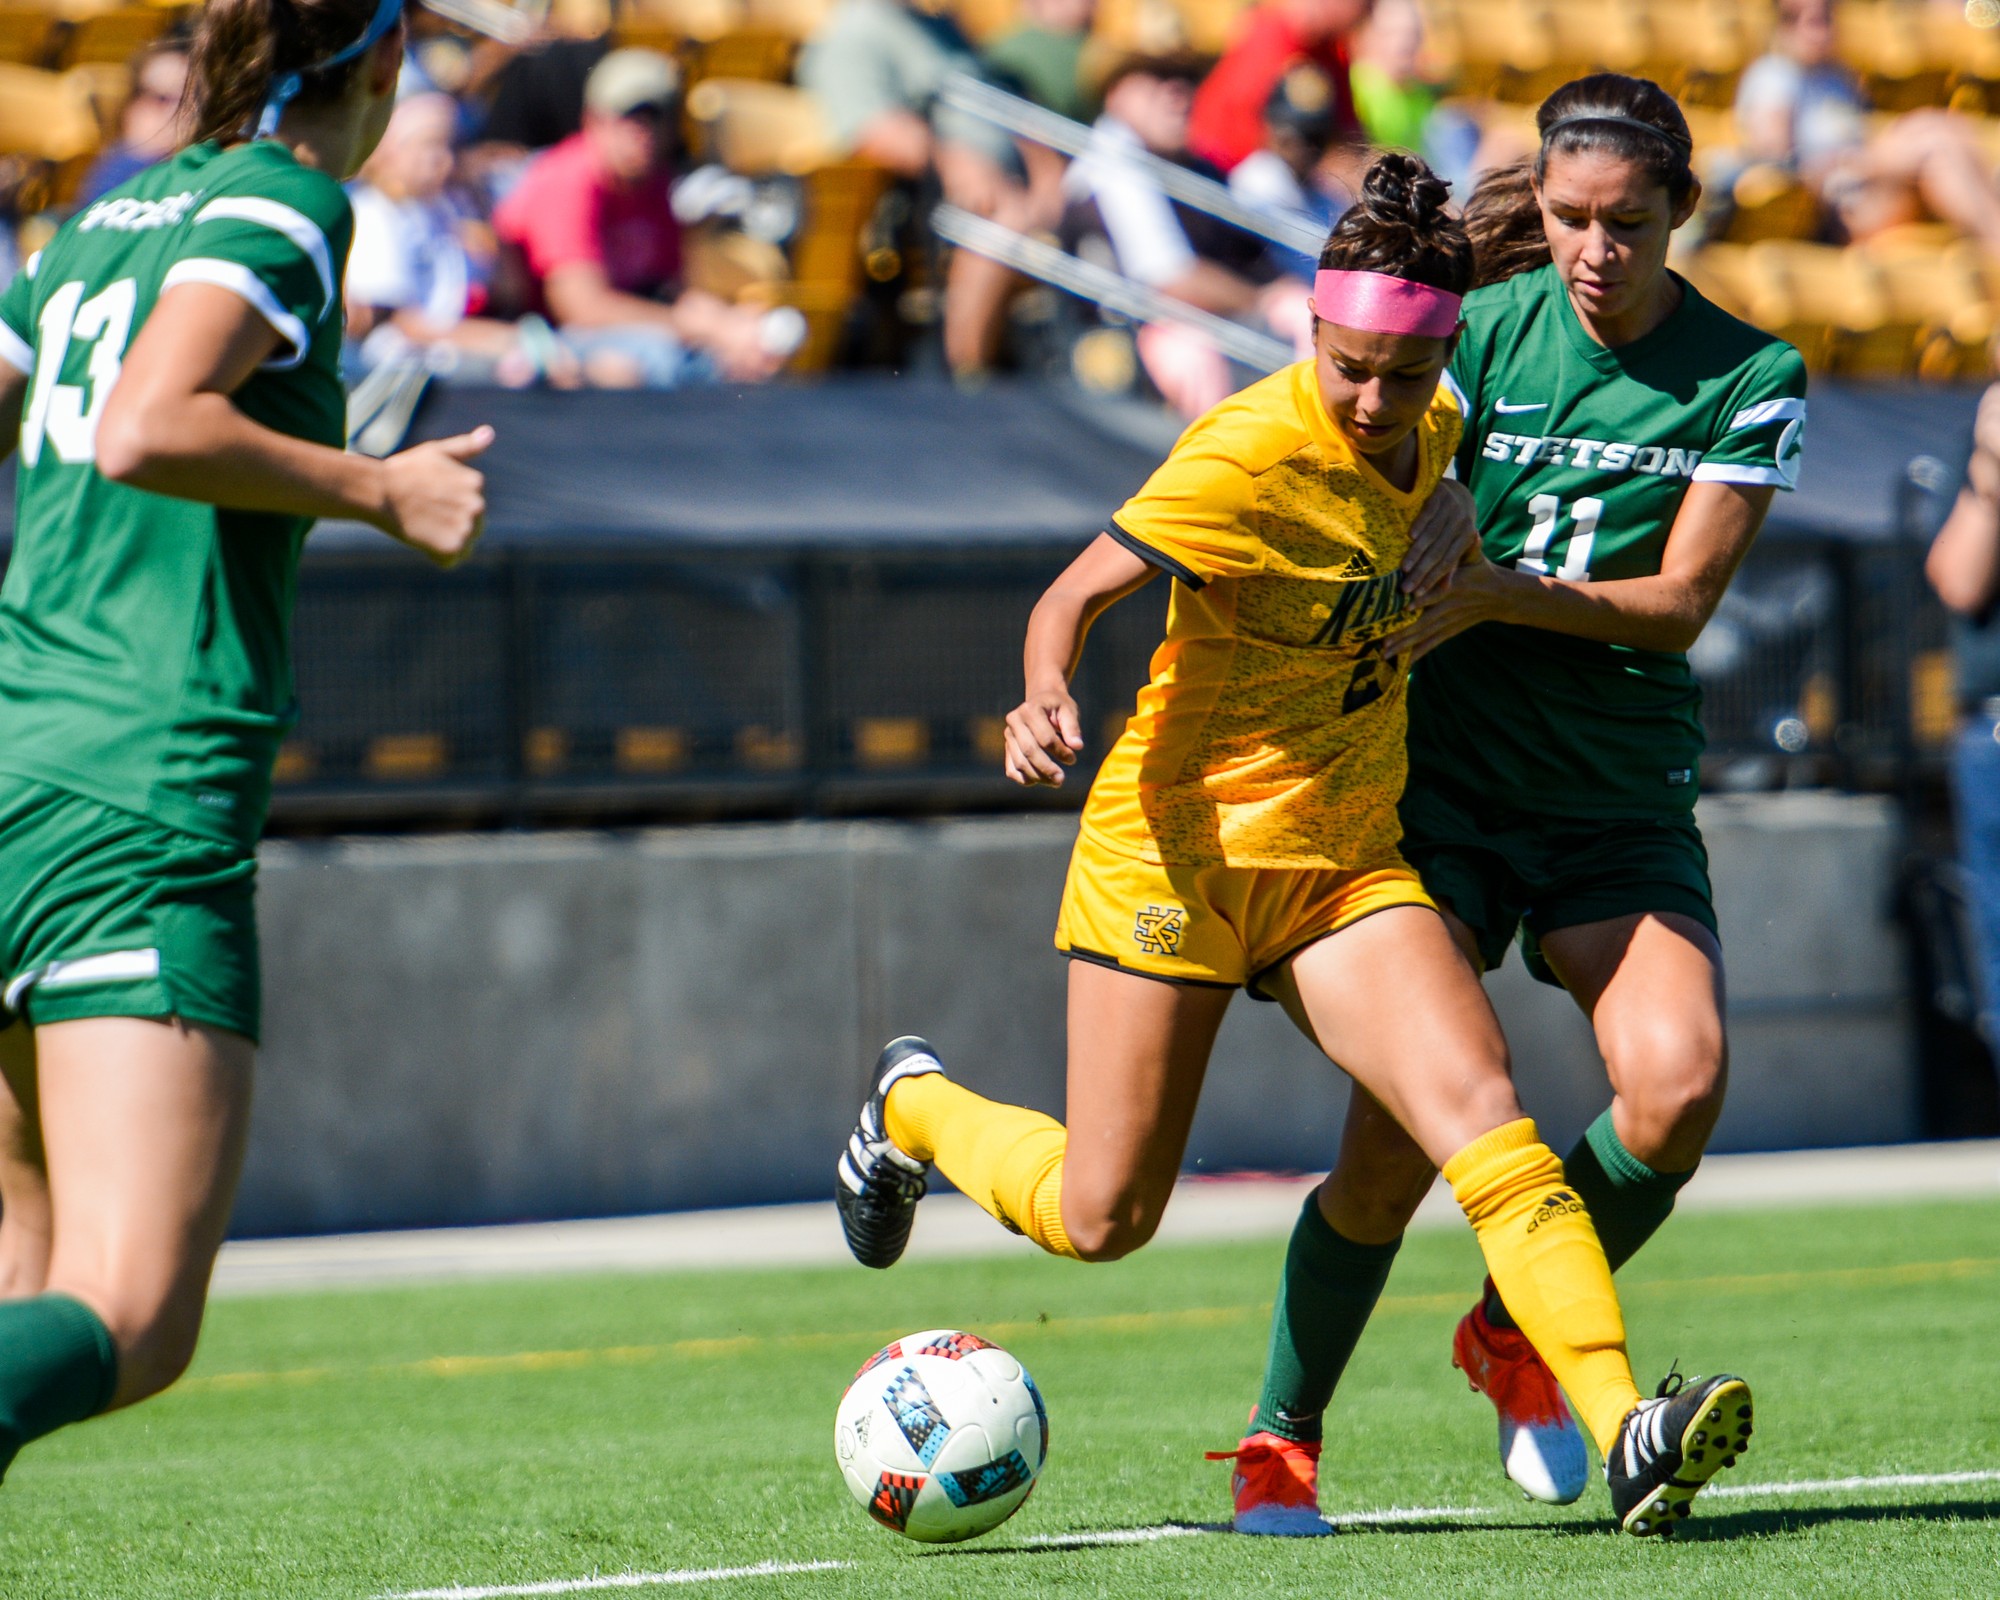 Soccer eliminated in ASUN Semifinals